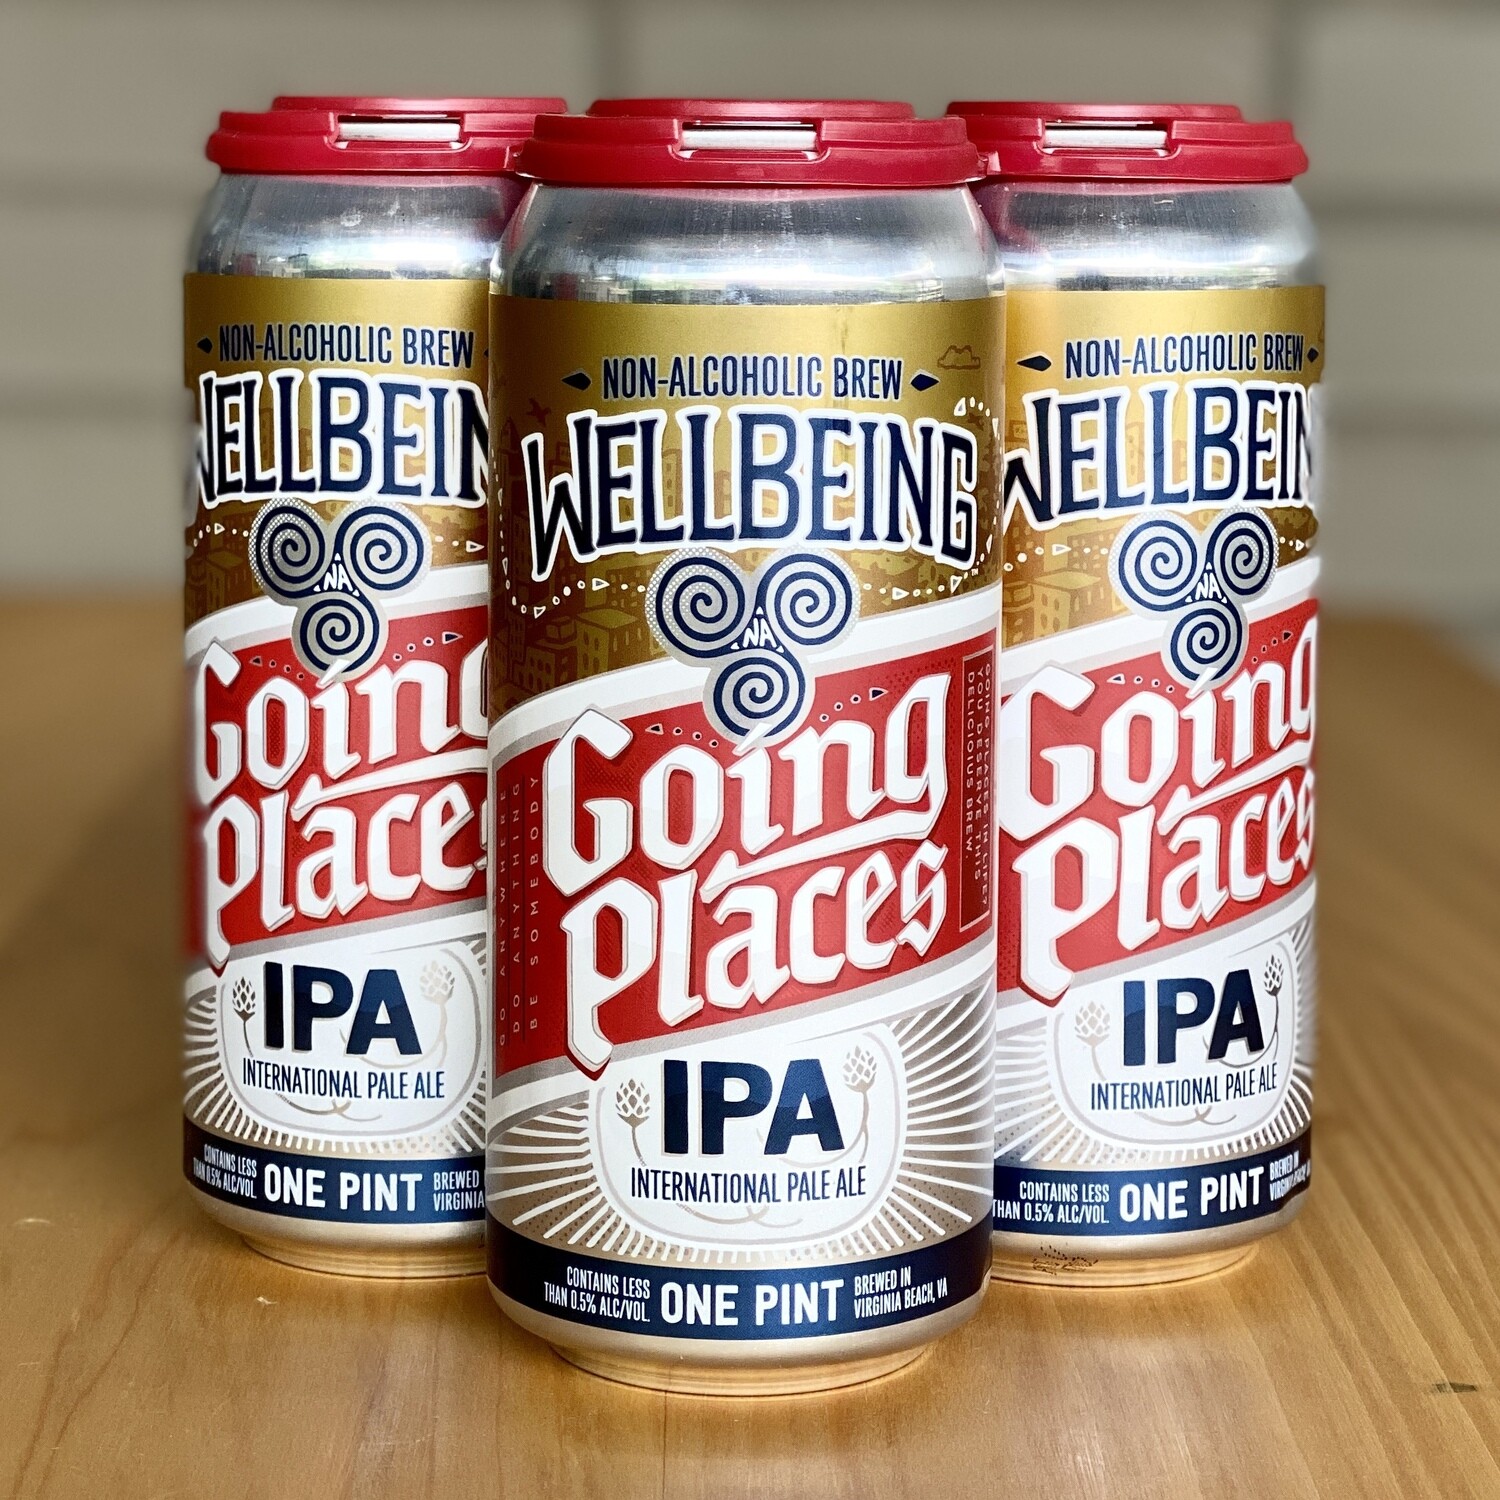 Wellbeing Going Places IPA Non-Alcoholic (4pk)